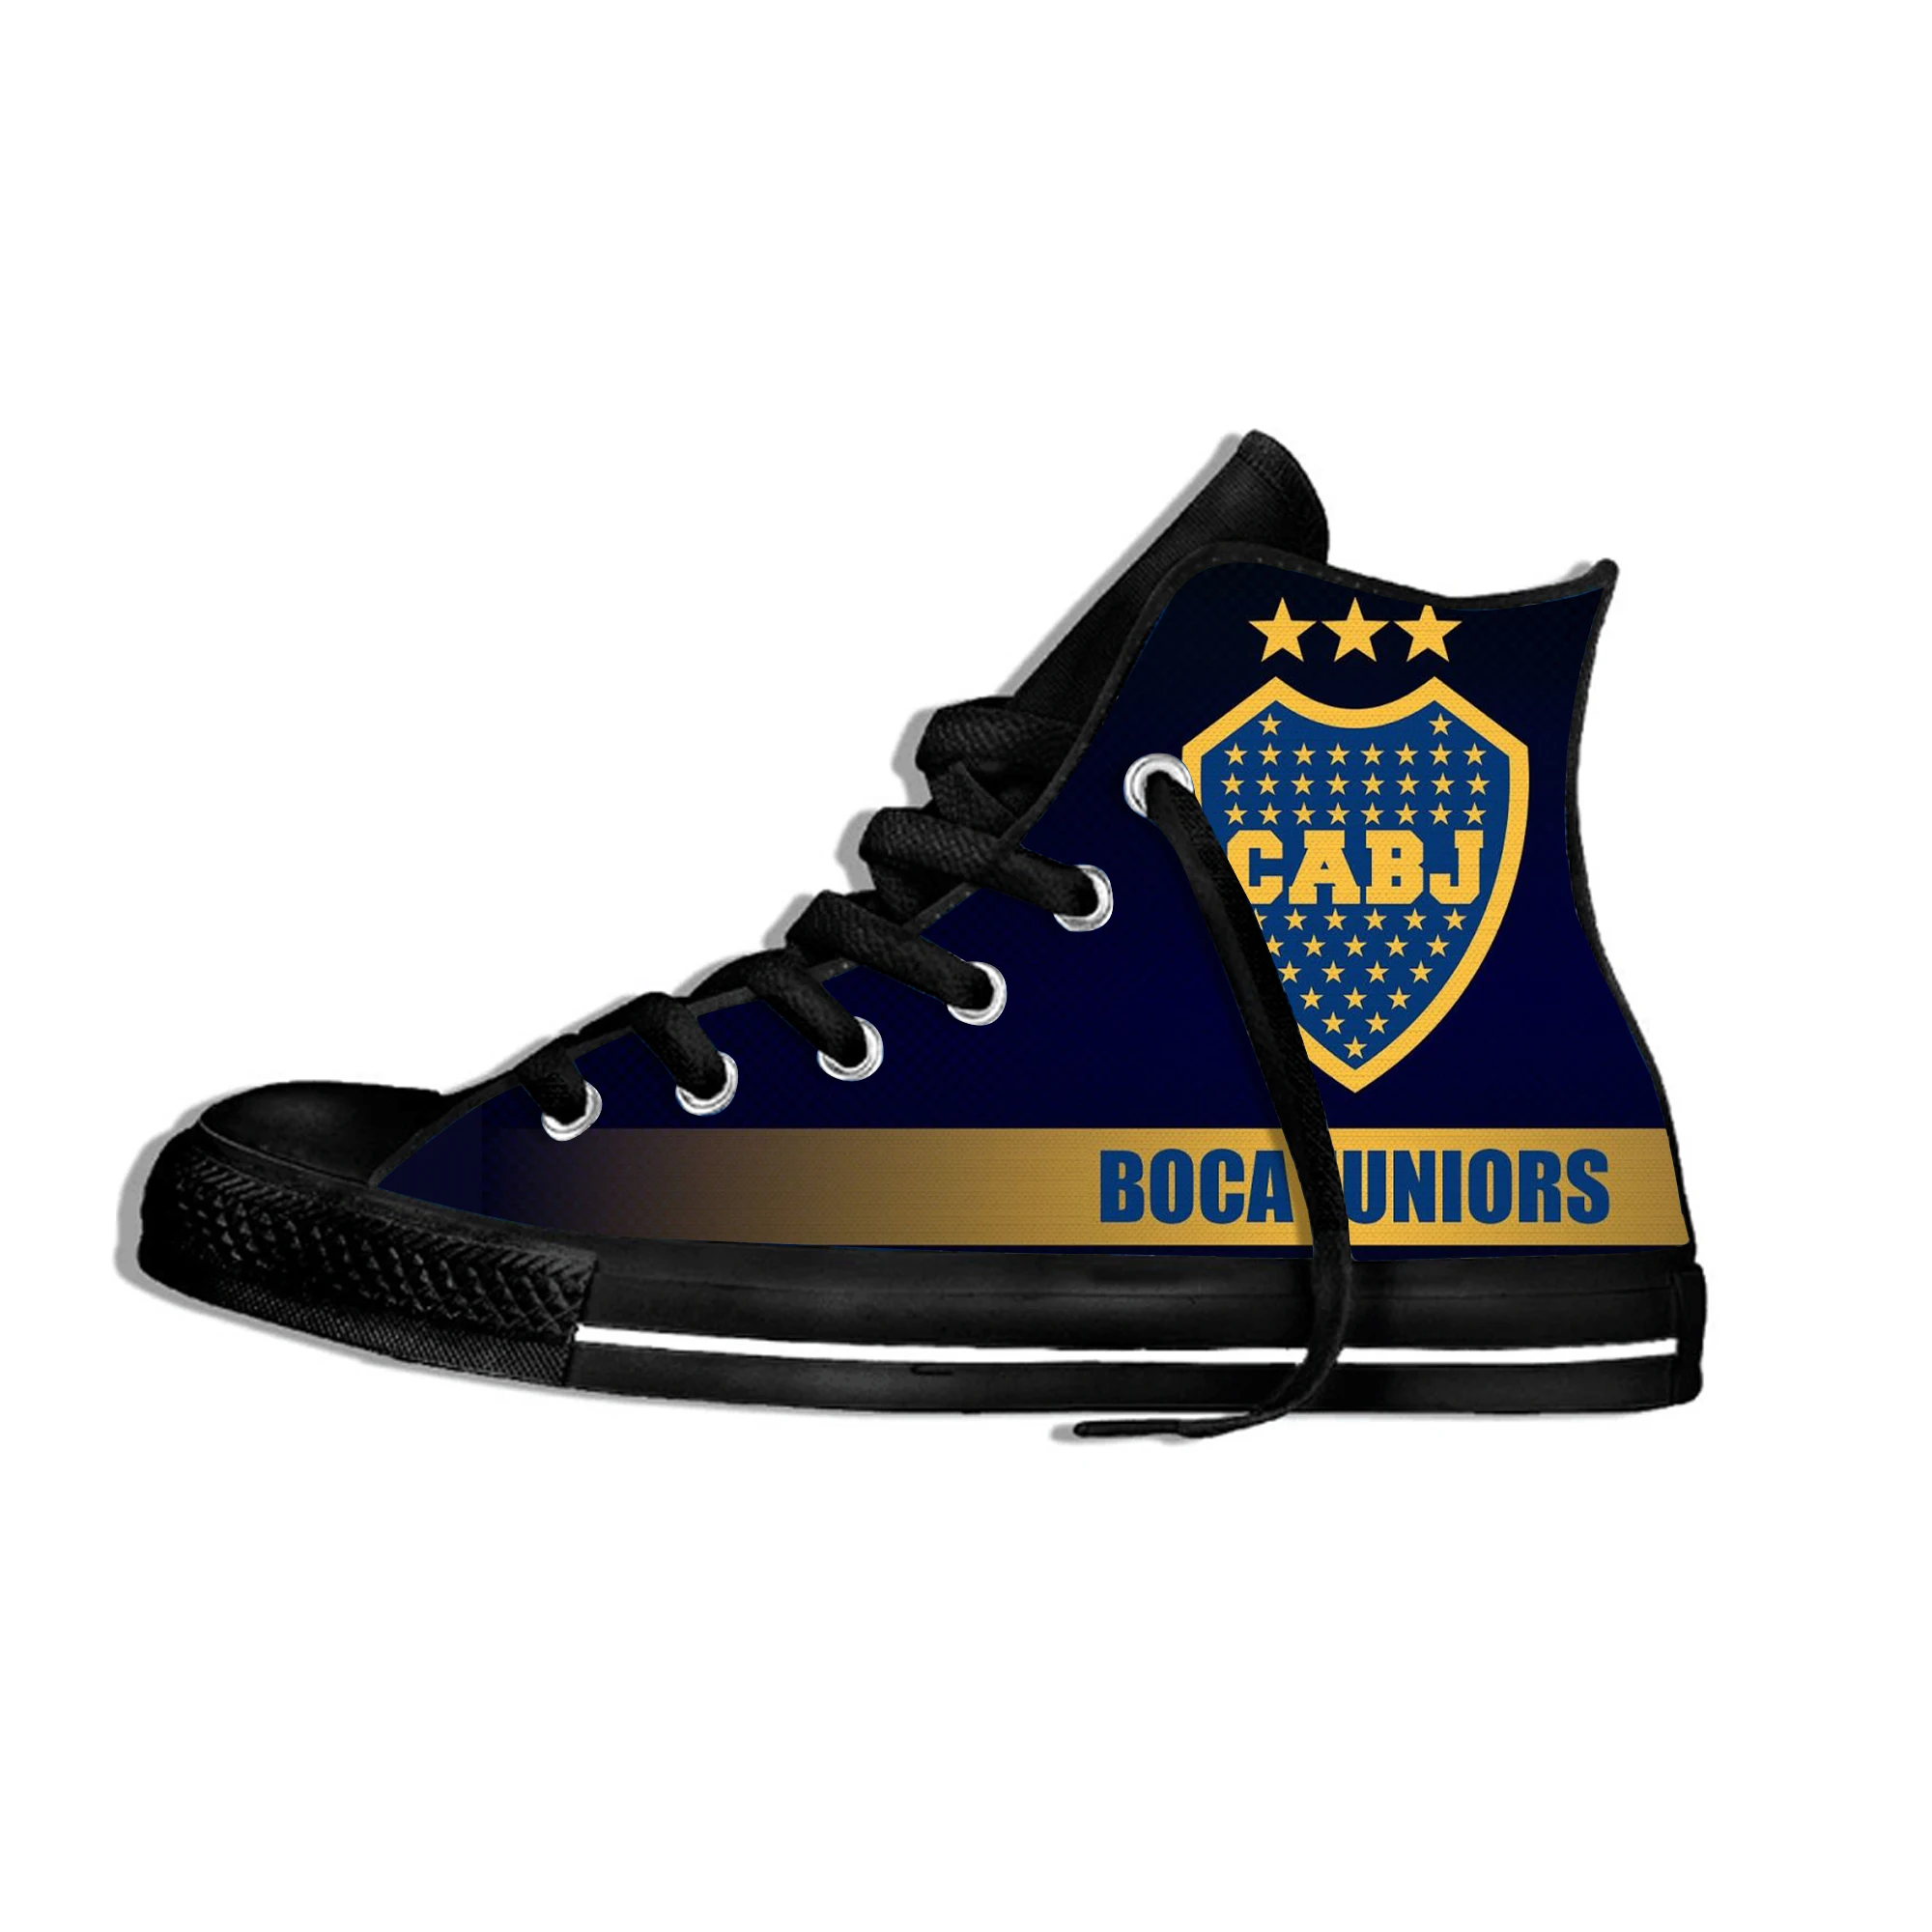 

Boca Juniors Jugador Lightweight Soccer FC Fans Men's/women's Fashion Shoes Football Club Breathable High Top Casual Sneakers